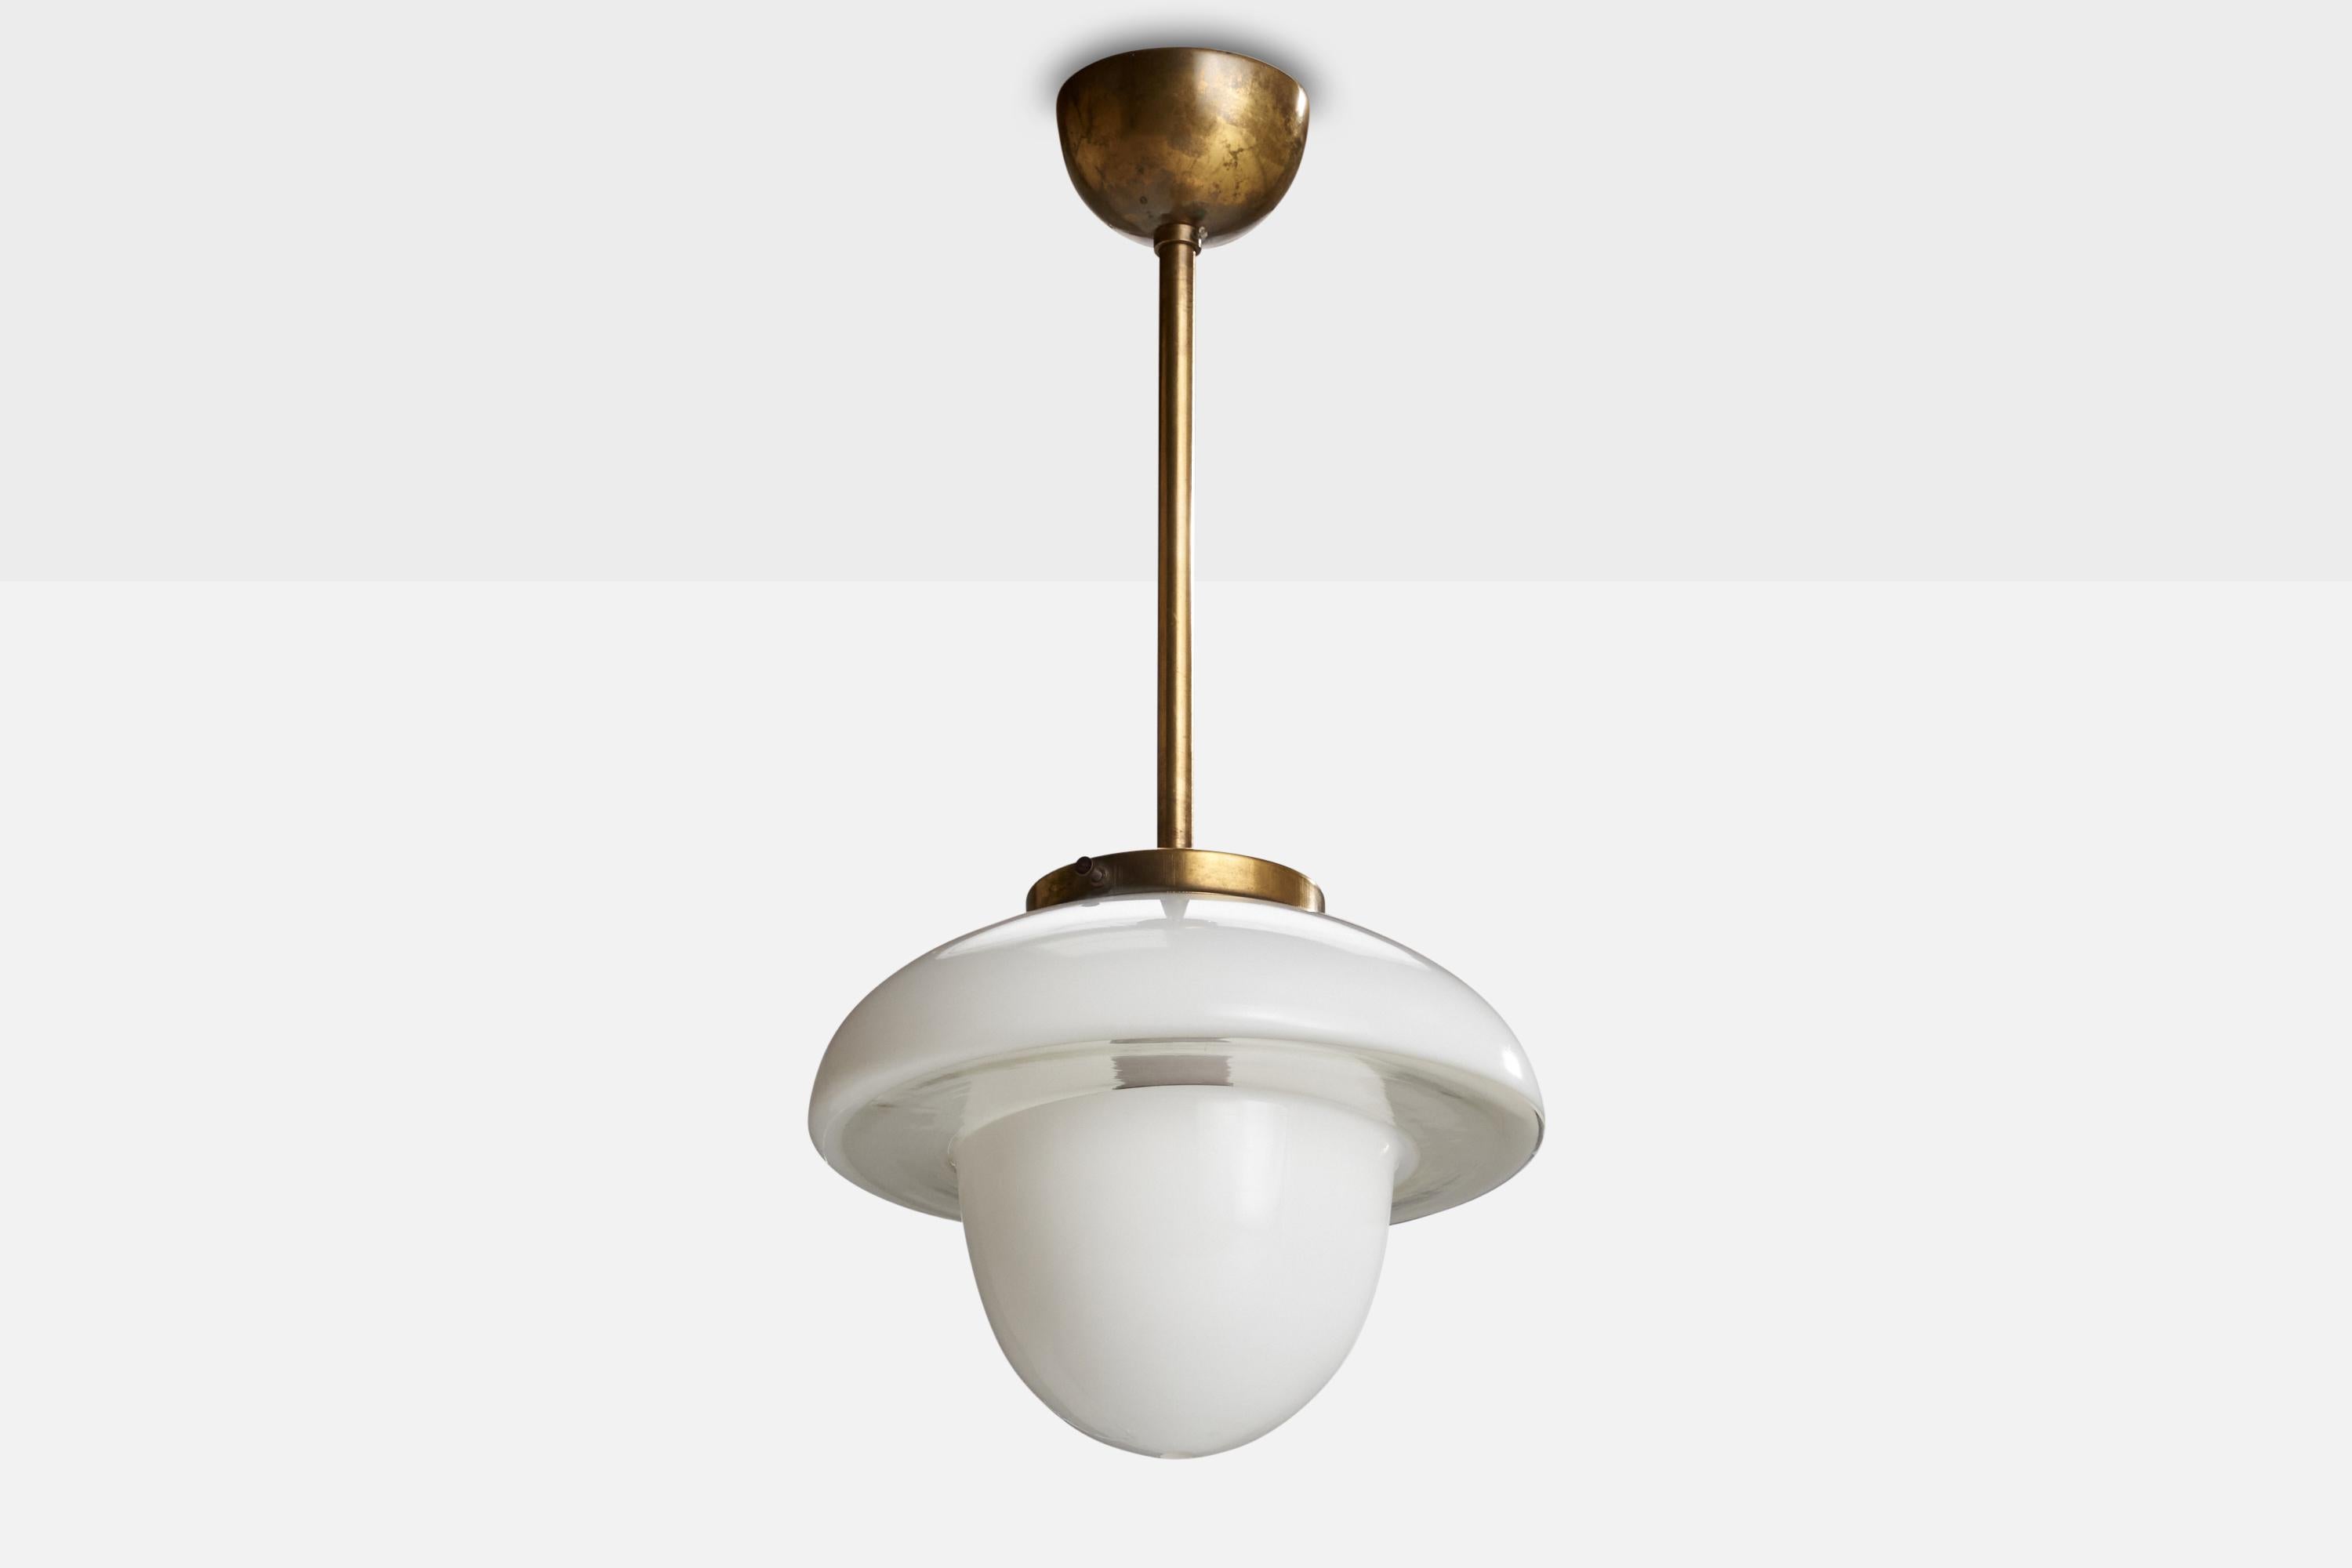 A brass and opaline glass pendant designed and produced by ASEA, Sweden, 1930s.

Dimensions of canopy (inches): 2.24” H x 3.36” Diameter
Socket takes standard E-26 bulbs. 1 socket.There is no maximum wattage stated on the fixture. All lighting will